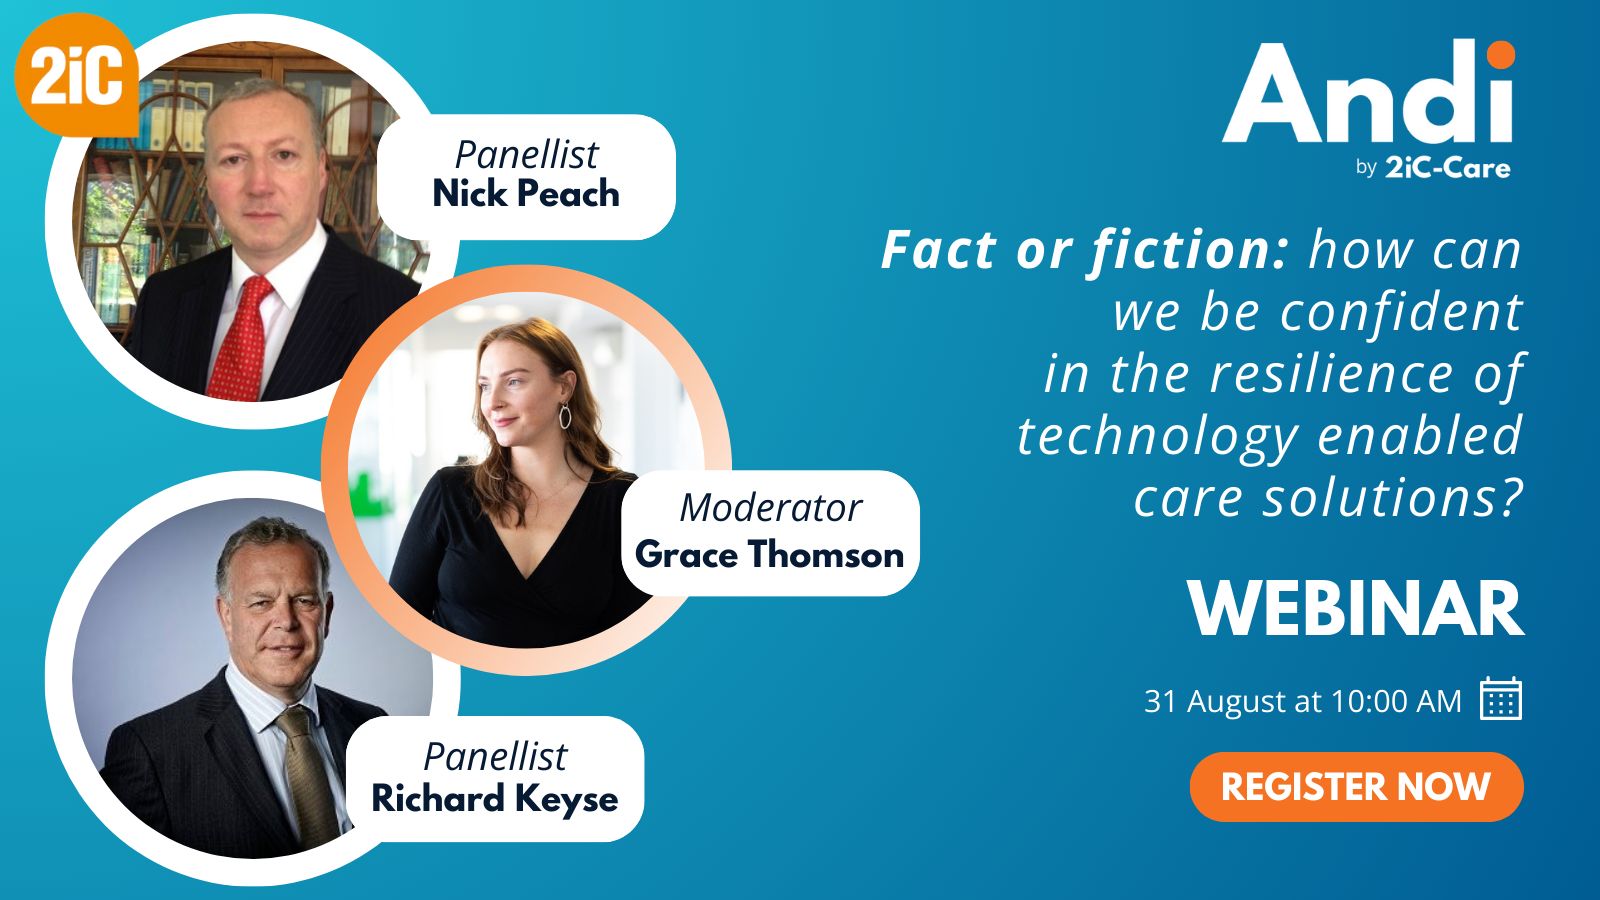 Webinar on demand- Fact or fiction: how can we be confident in the resilience of technology enabled care solutions?